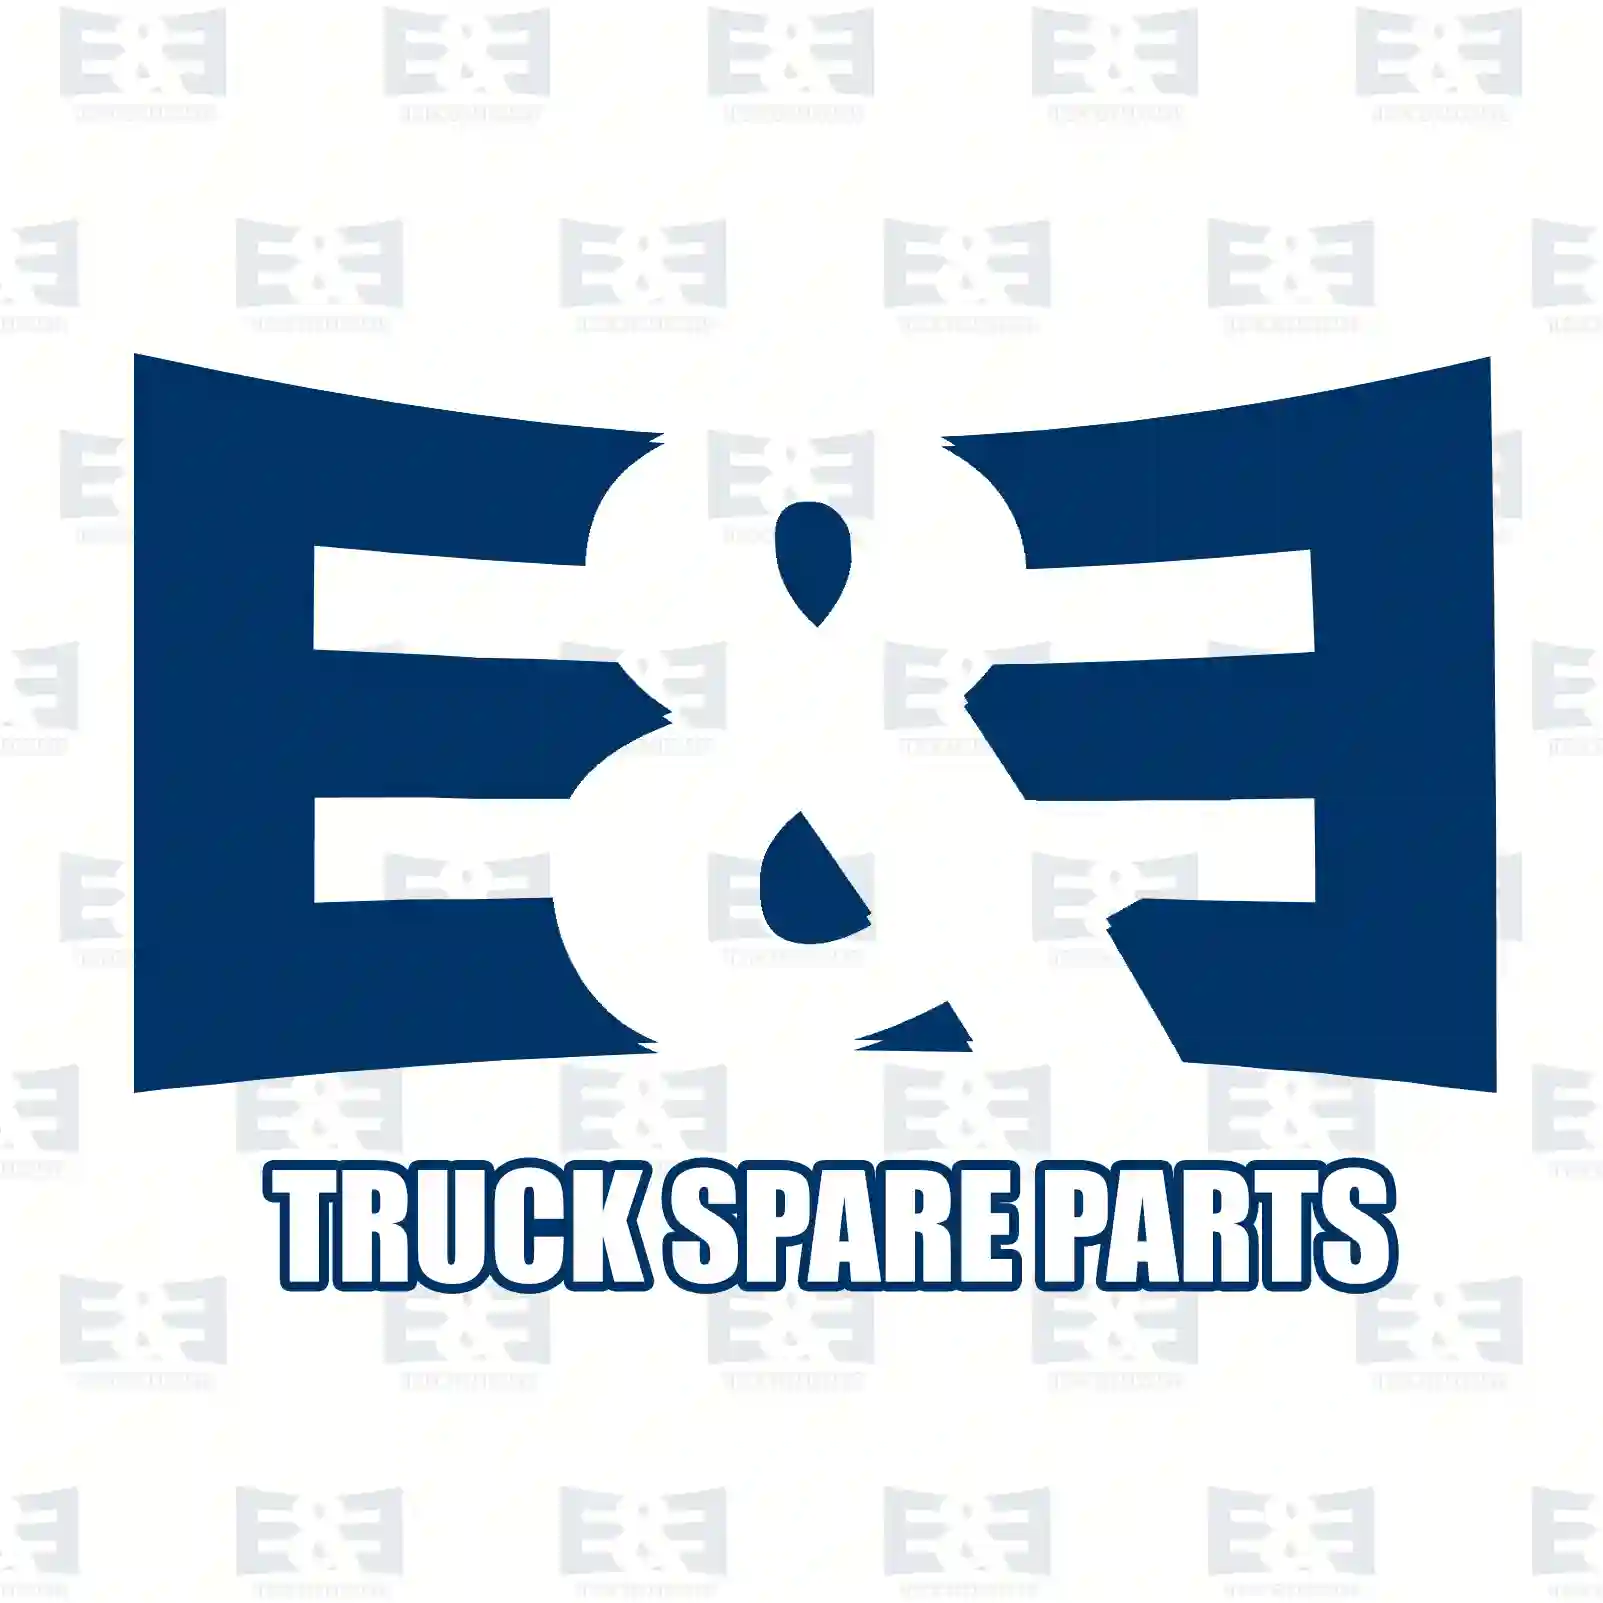  Bearing housing, differential || E&E Truck Spare Parts | Truck Spare Parts, Auotomotive Spare Parts